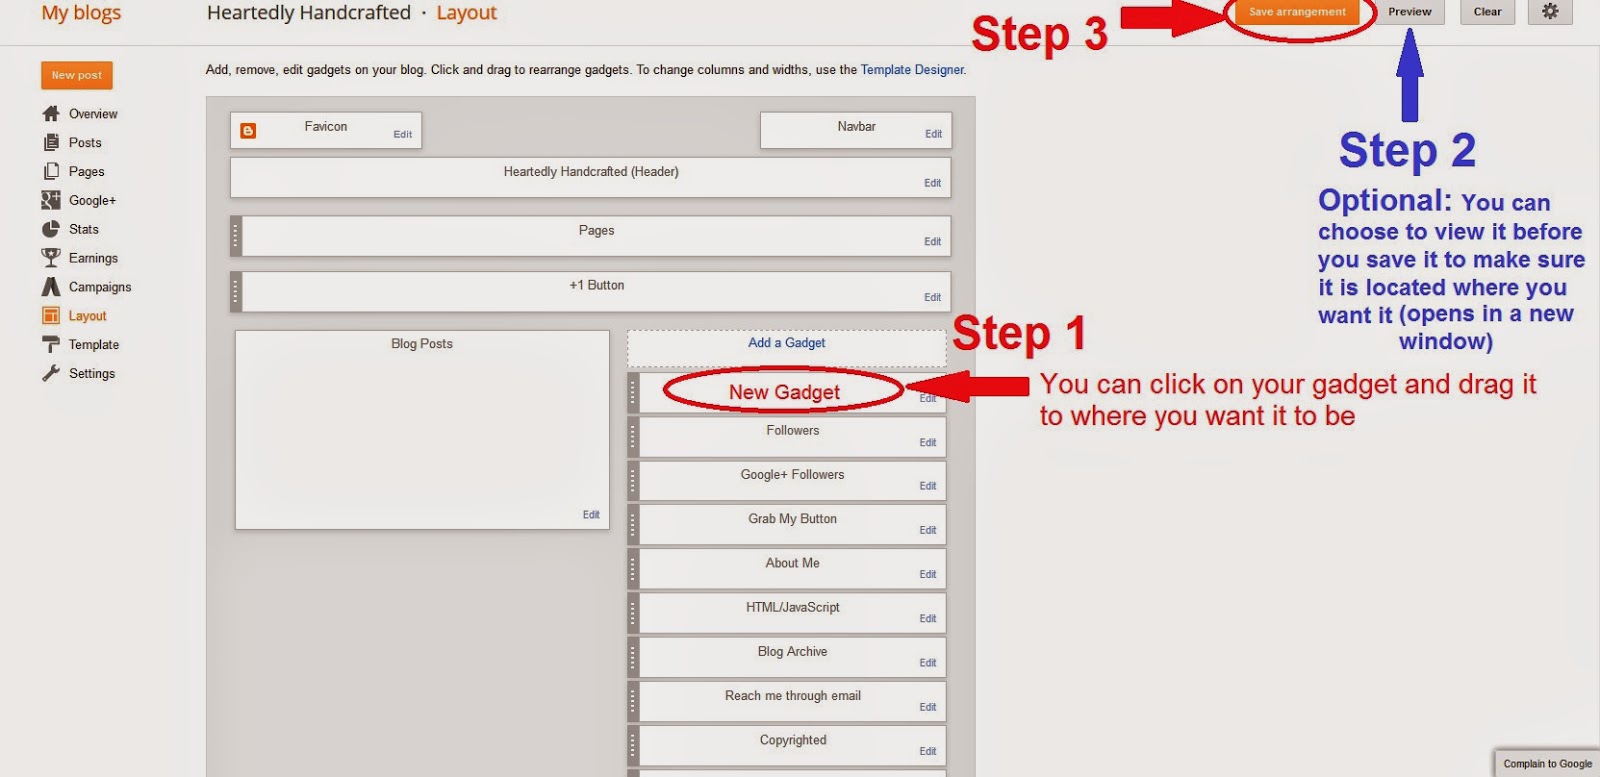 How to Add a Gadget in Blogger